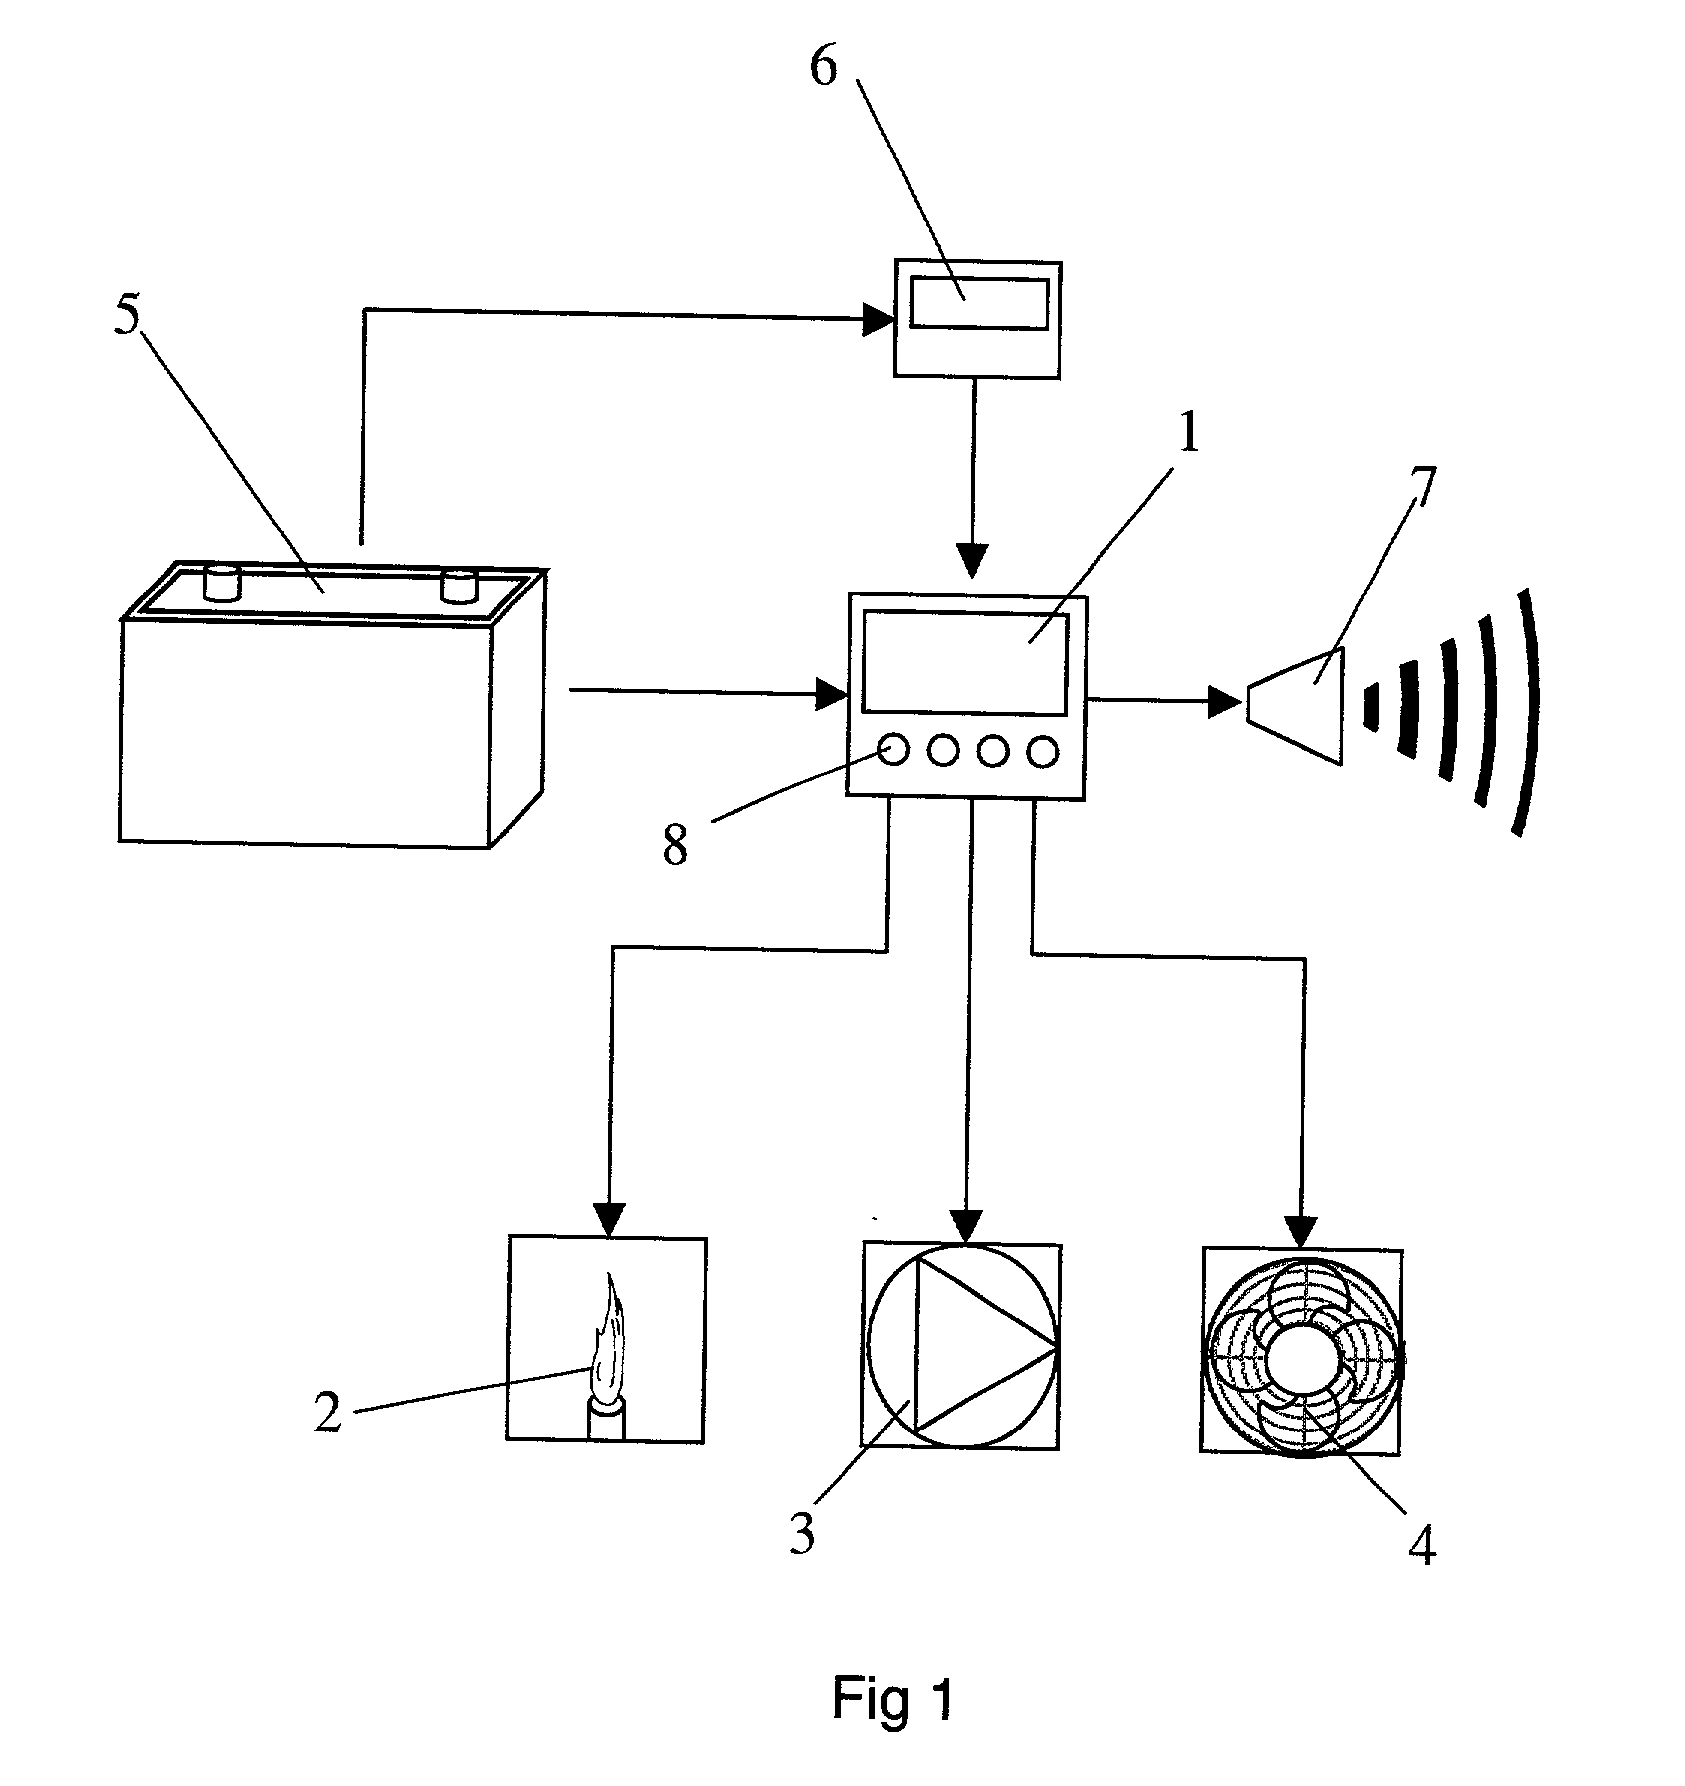 Arrangement for supplying heat to a motor vehicle when the vehicle's engine is not running